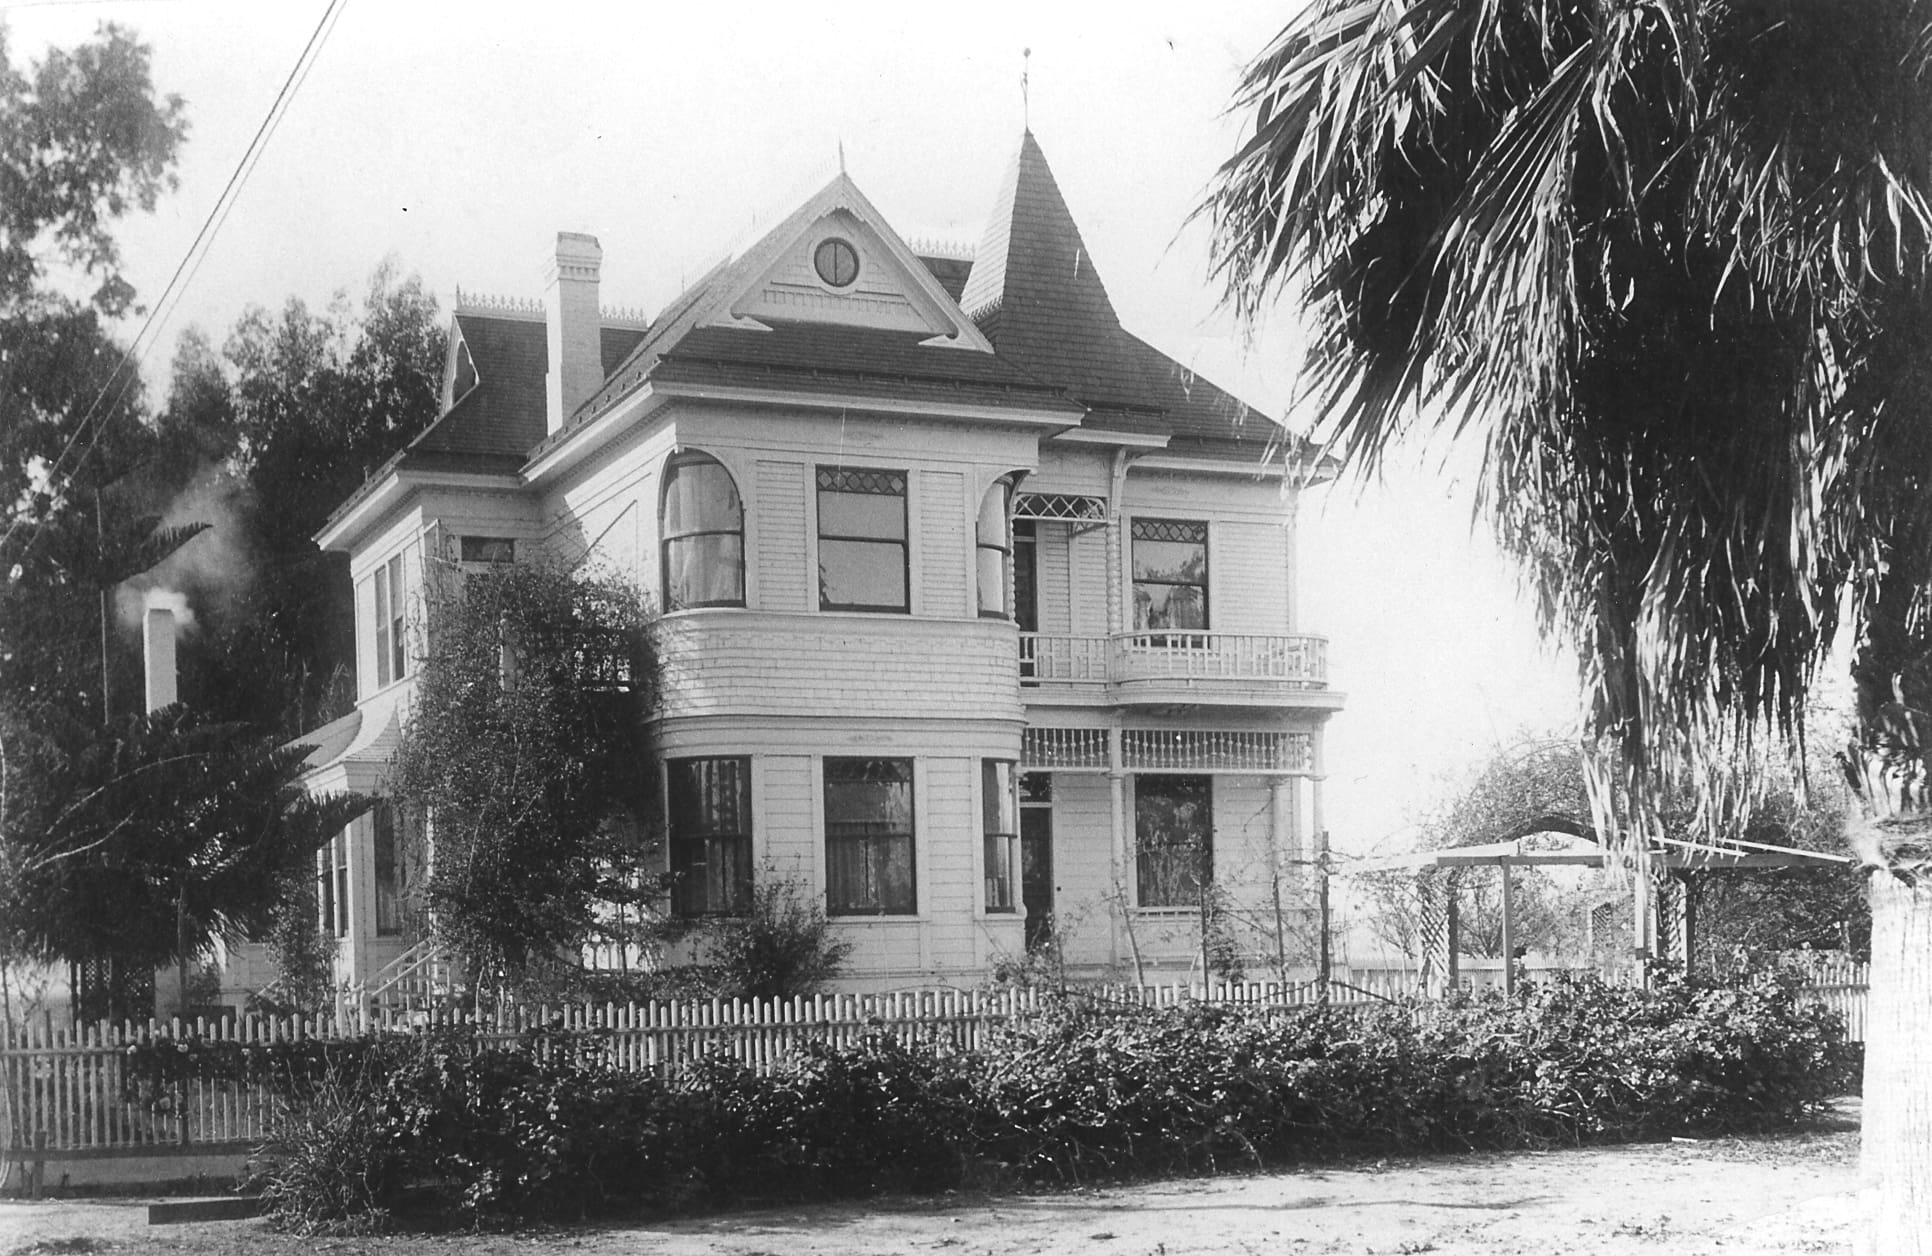 Black and white historical photo of a two-story Victorian house with a turret in Oxnard, surrounded by a picket fence and palm trees.